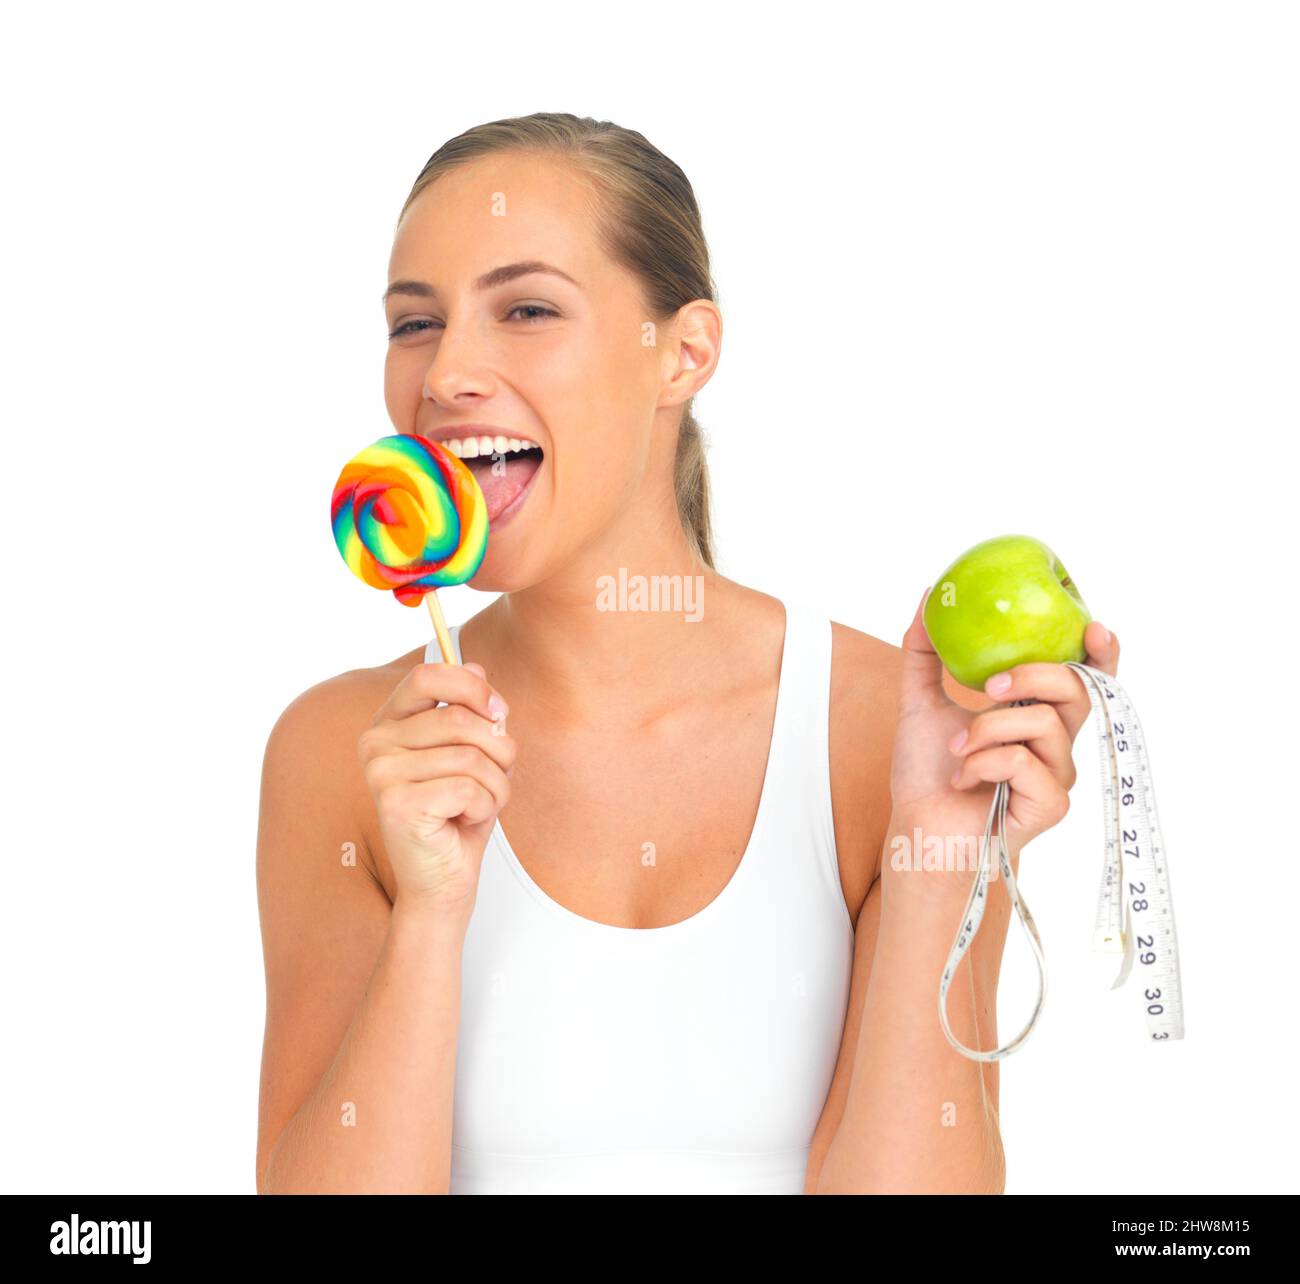 Portrait of a sporty young woman licking a lollipop while holding an apple. Stock Photo